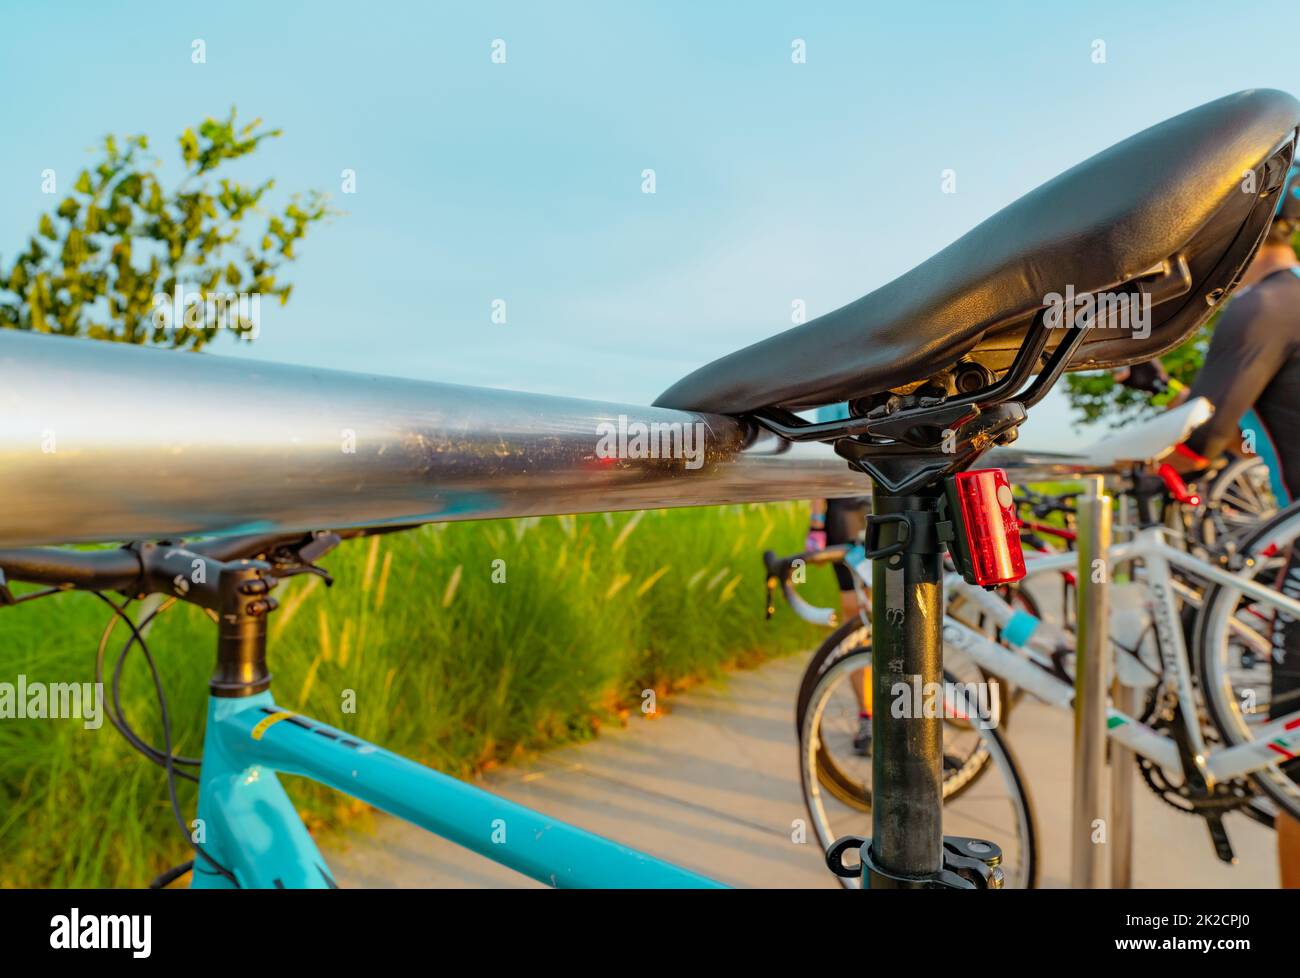 Bicycle parked on aluminium rack at the park. Outdoor exercise and recreation activity. Bicycle at bike parking station. Eco-friendly. Healthy lifestyle. Outdoor activity in summer. Extreme sport. Stock Photo